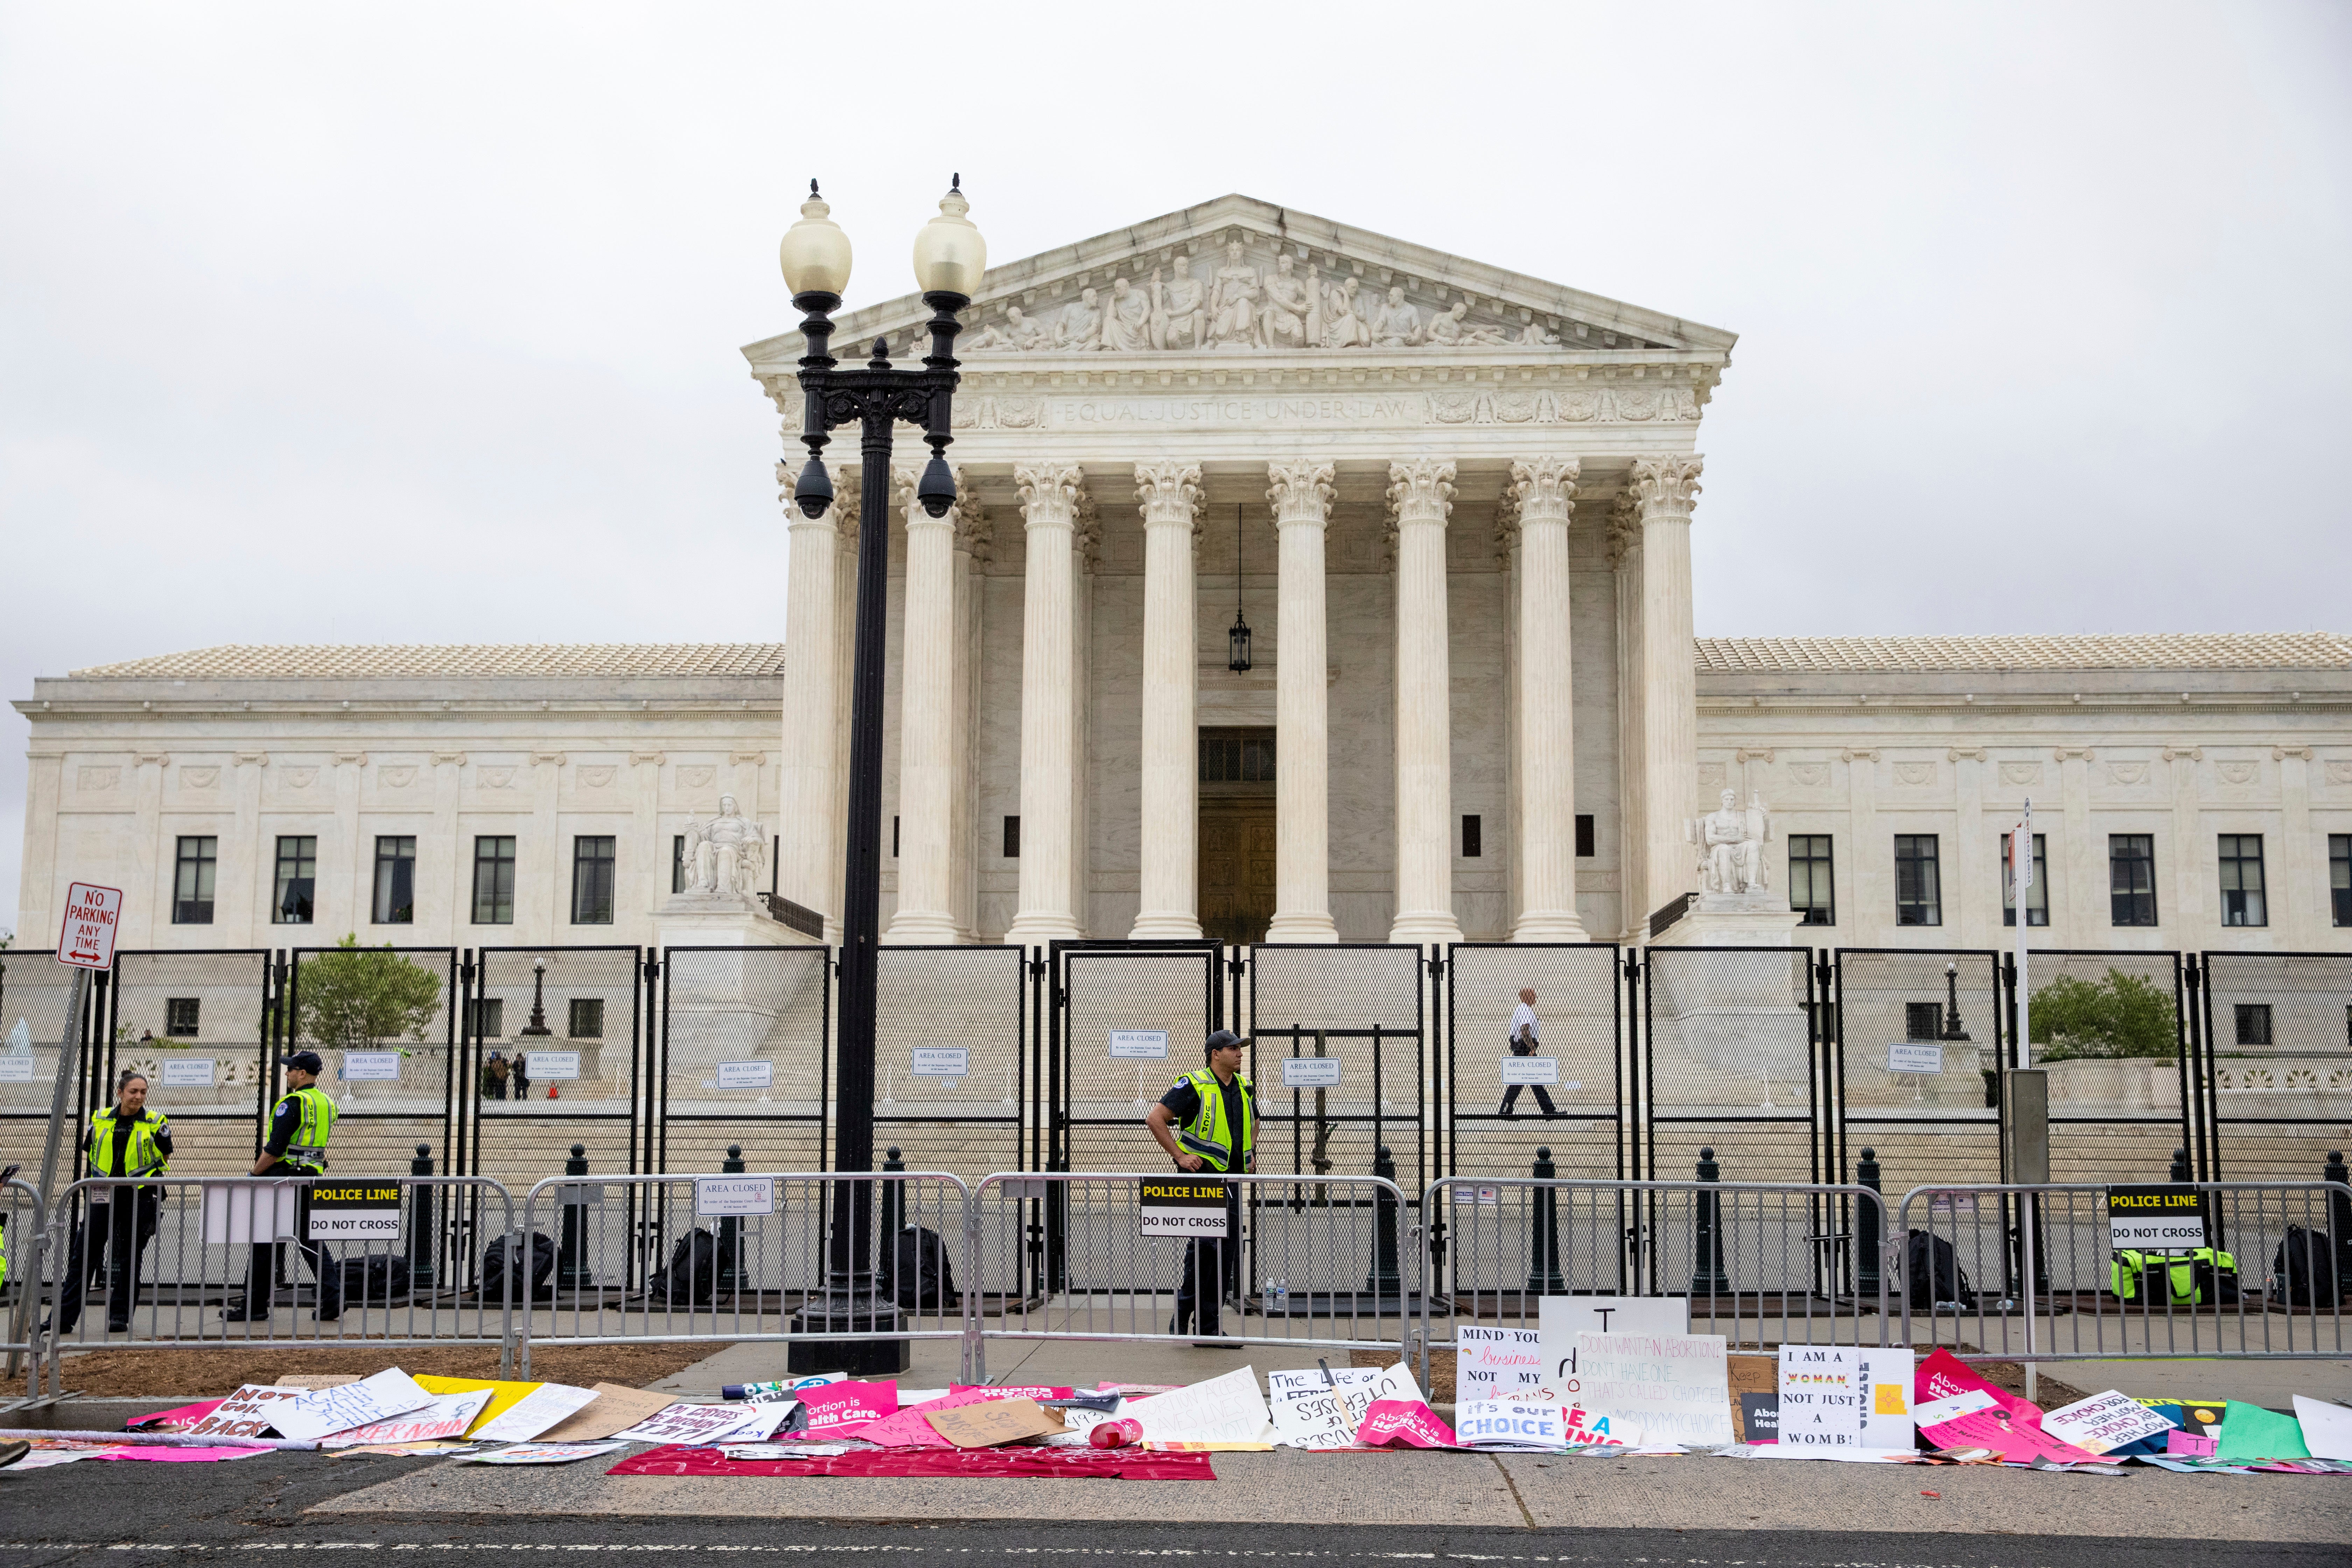 Fencing surrounds the Supreme Court ahead of the anticipated ruling